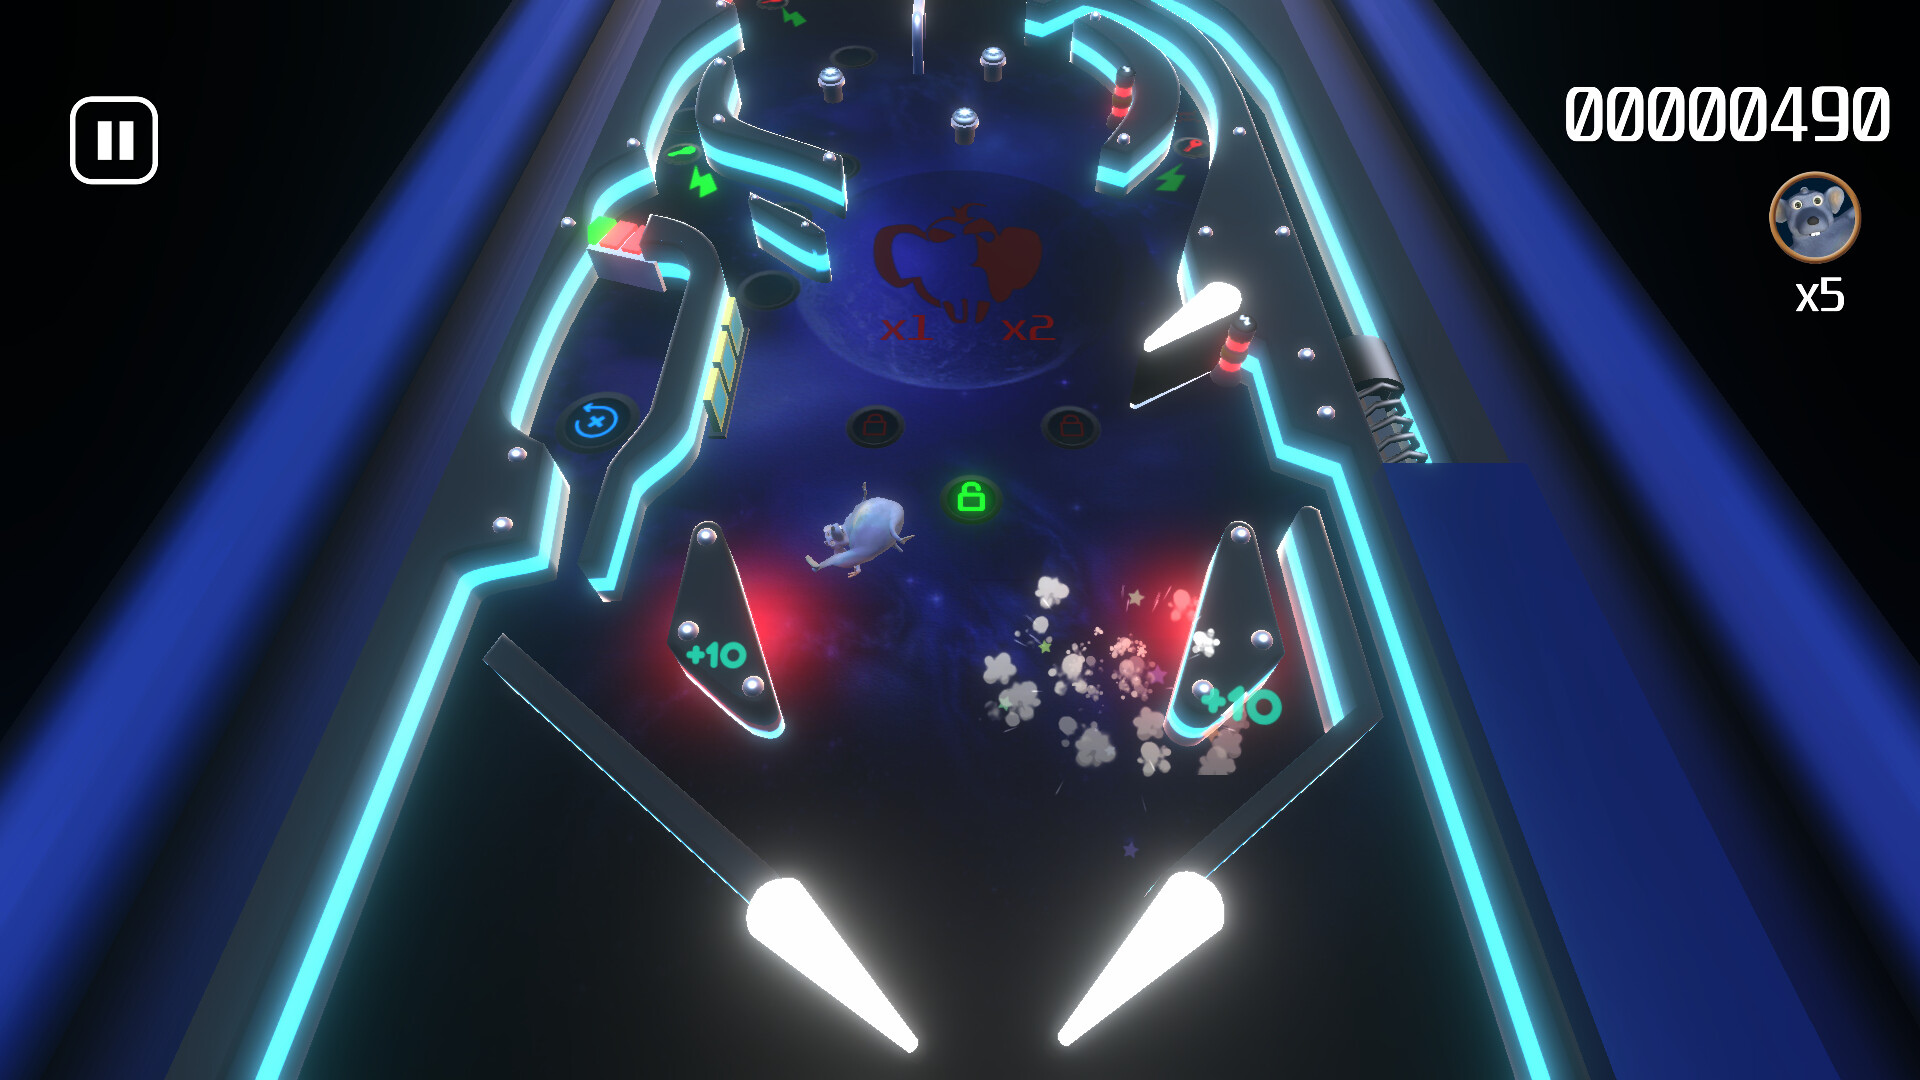 3D Pinball for Windows: Space Cadet 🔥 Play online